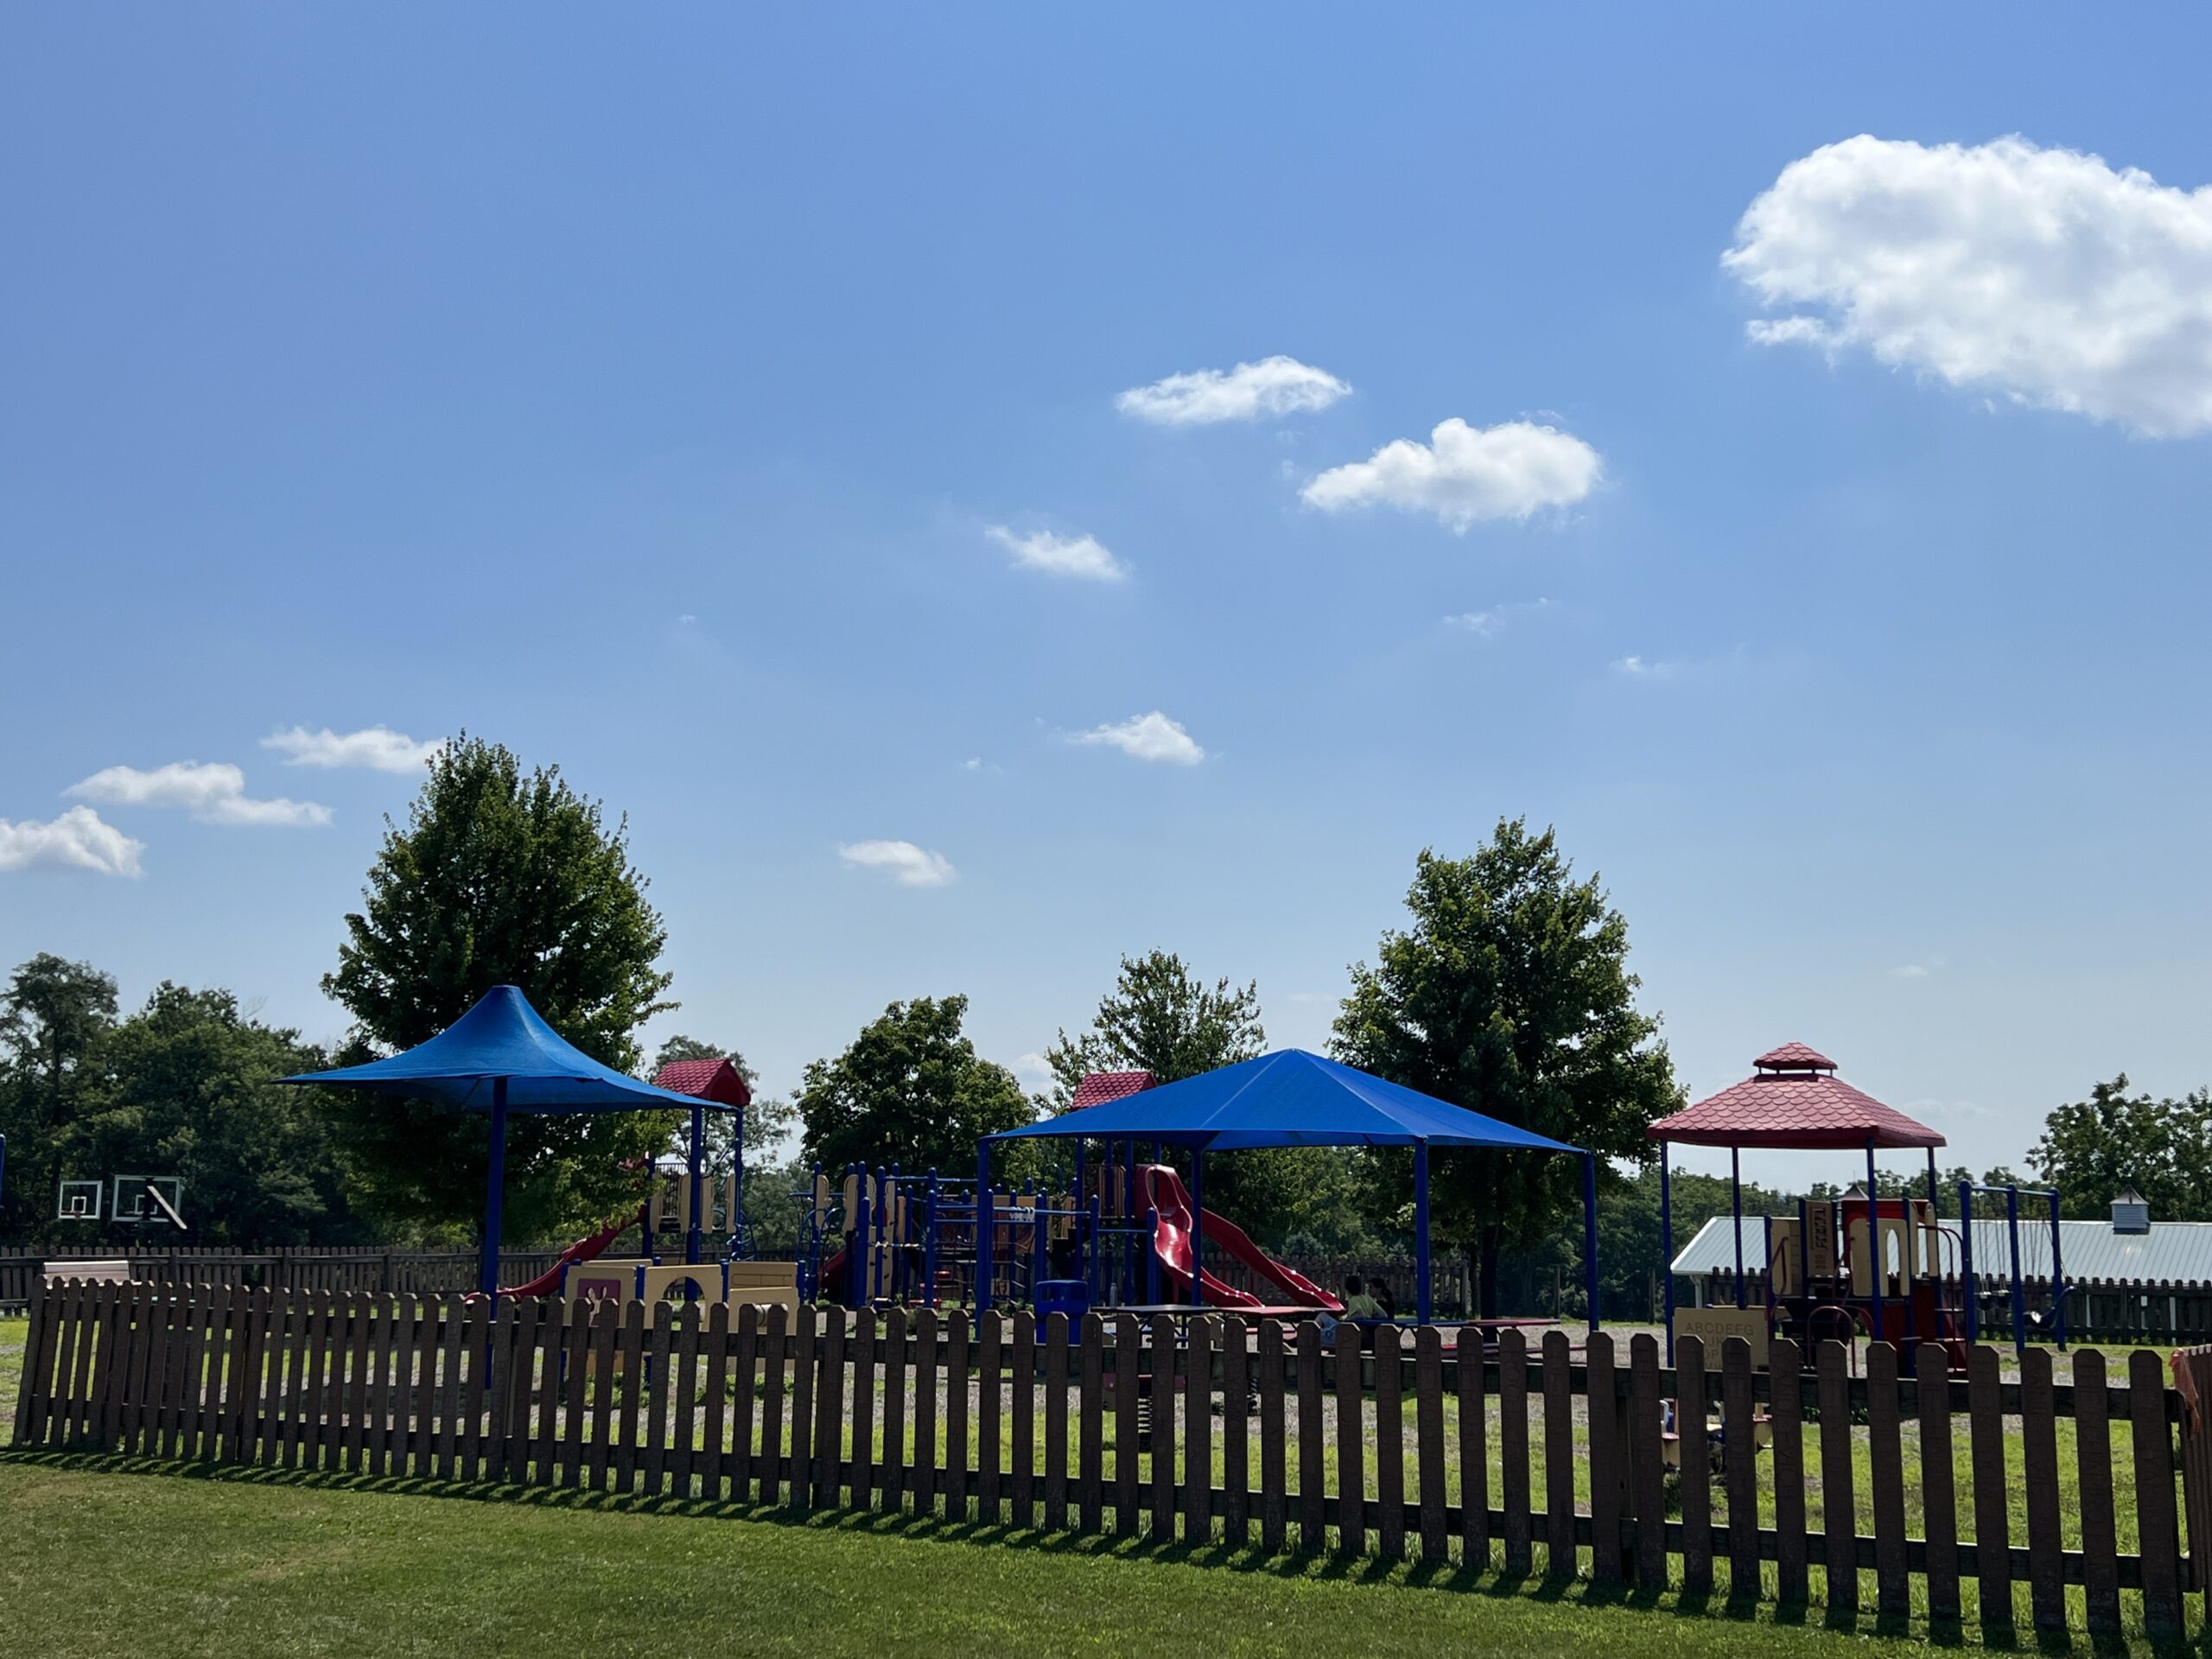 Alexandria Township Park Playground in Milford NJ - WIDE image - playground with fence around it